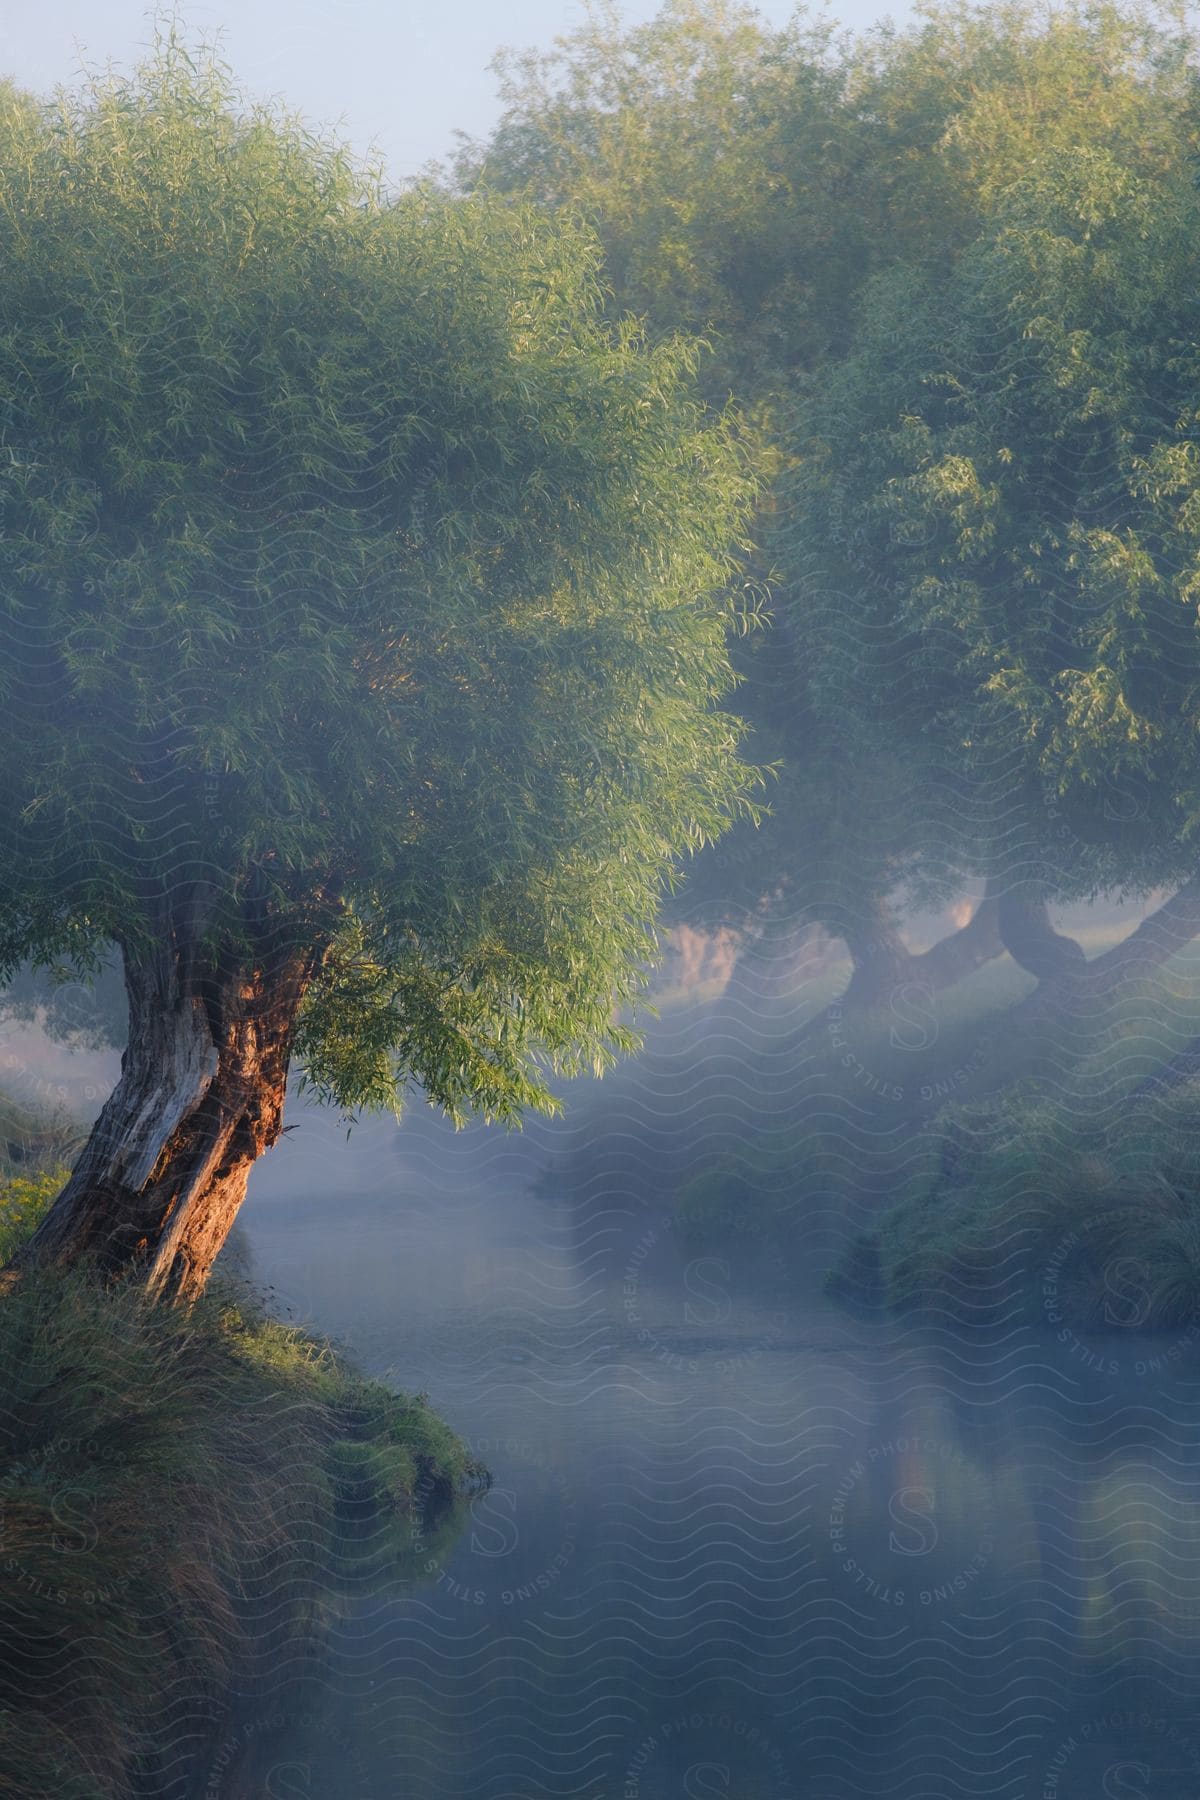 A digital painting of a river passing through a forest of trees.